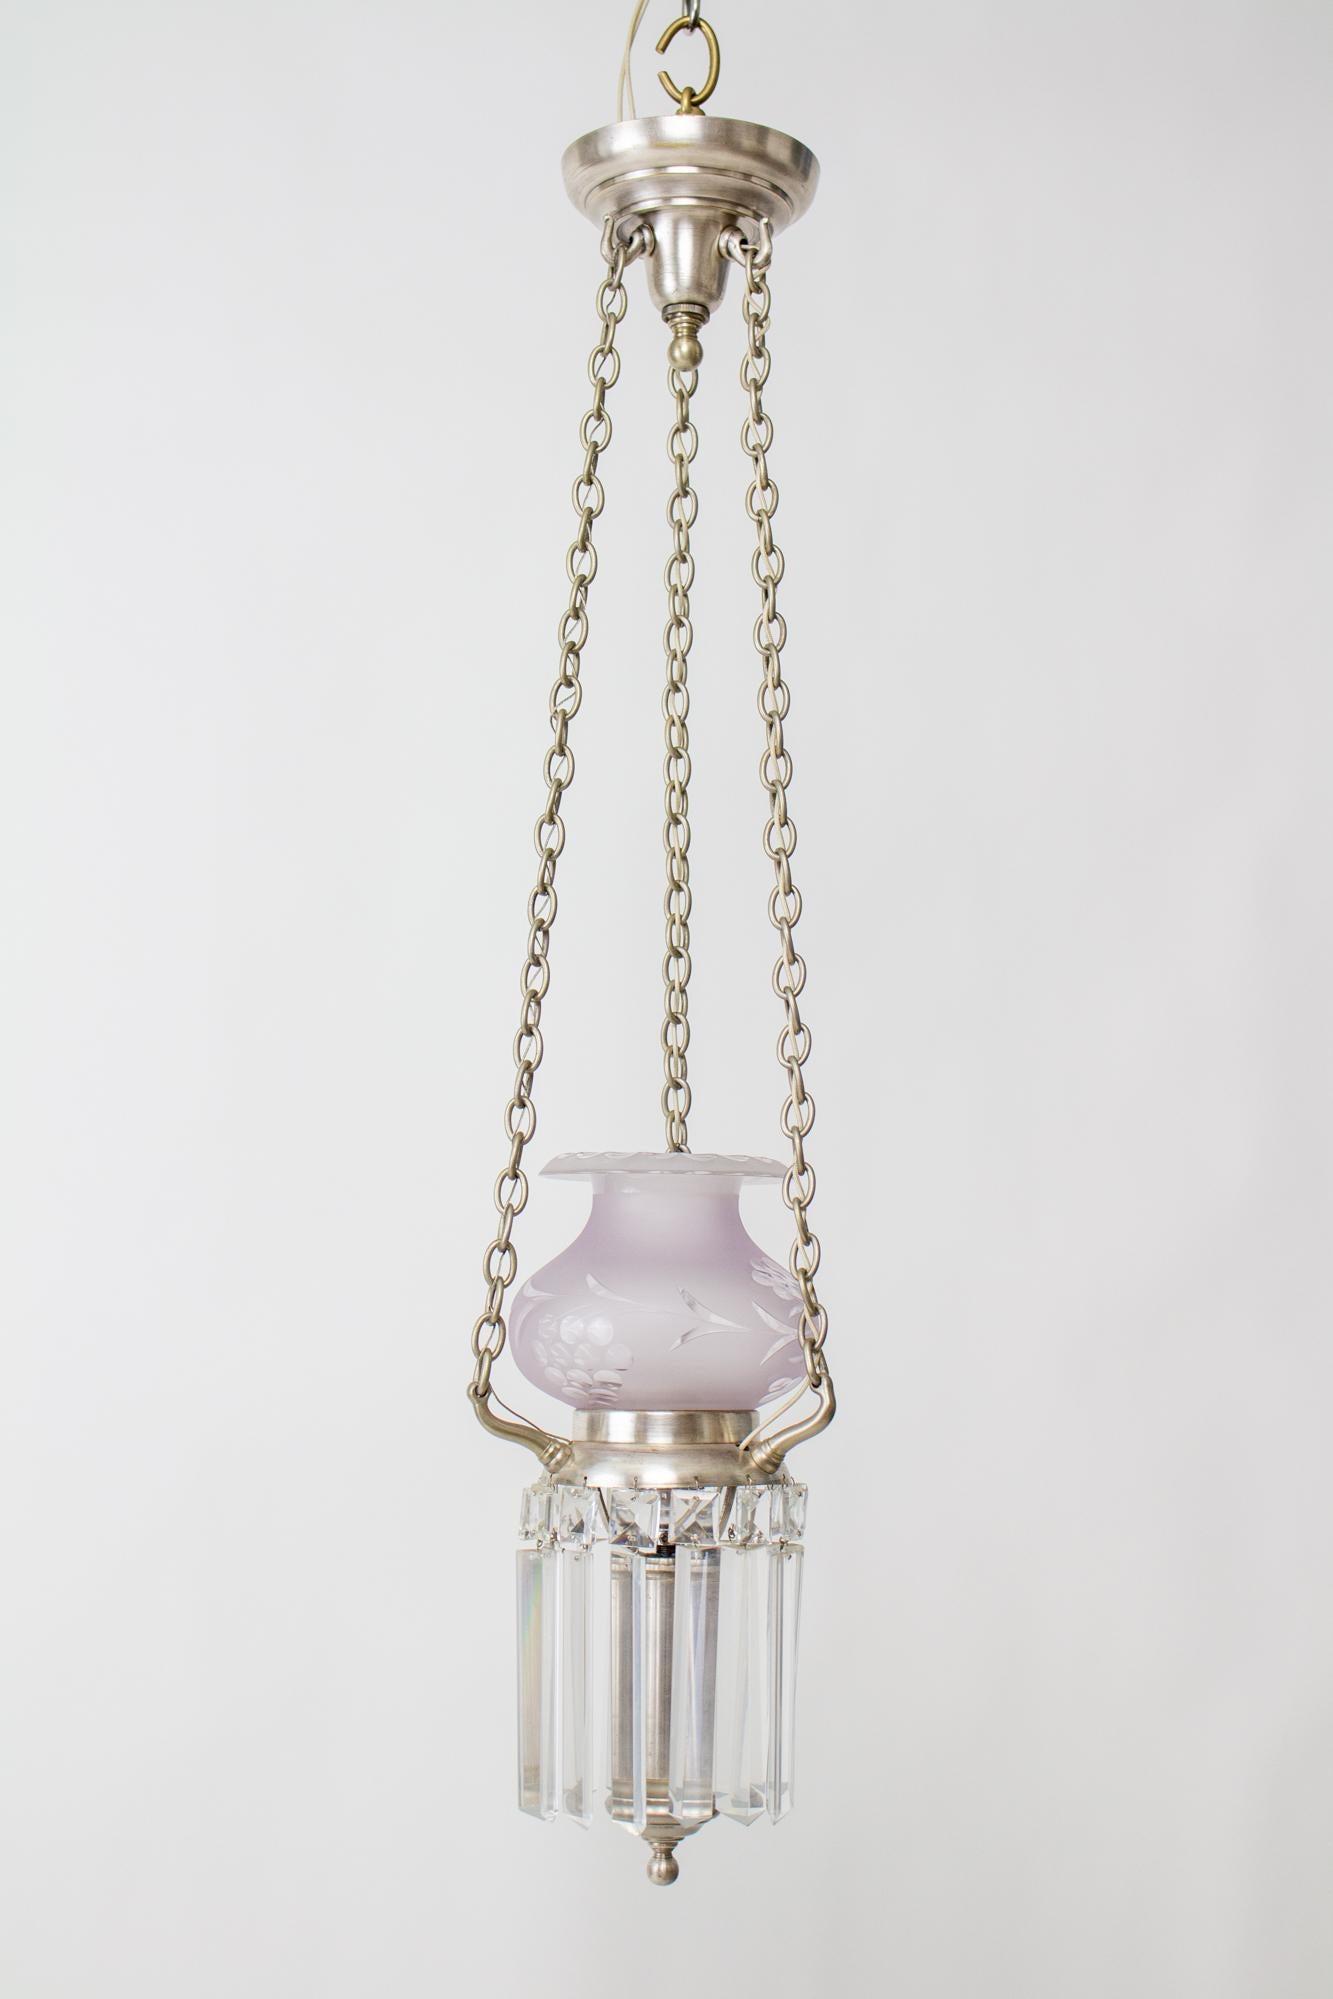 Silver and crystal argand pendant light. This would be excellent for a high ceilinged entryway or a stairway. A central light hangs from three strands of delicate chain. The light has a single frosted and cut glass shade, and is hung with a ring of